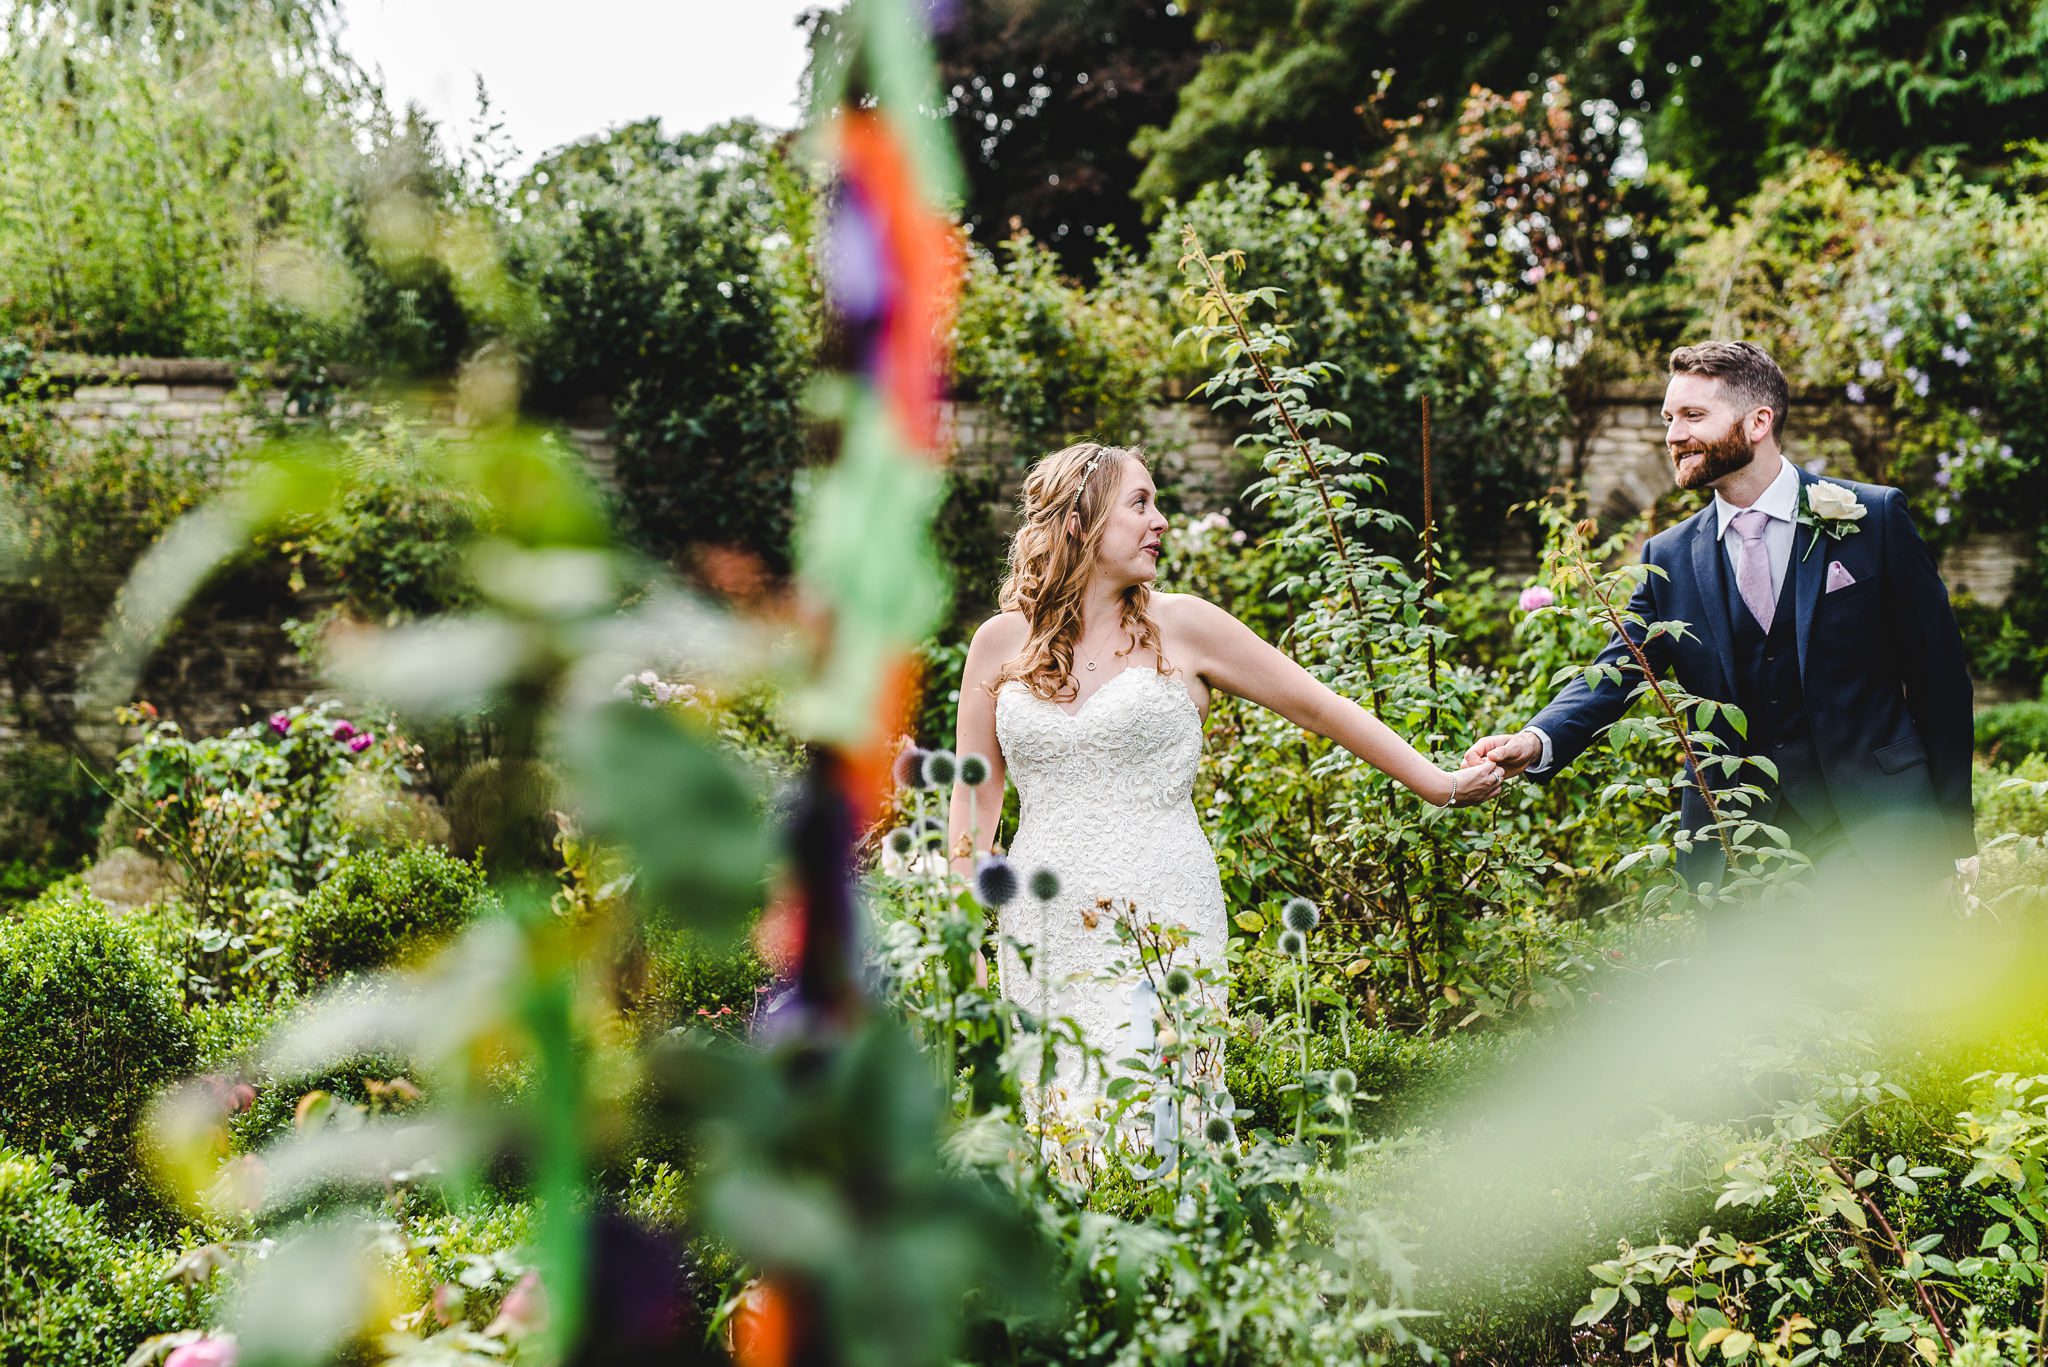 Bride leading groom out of a colourful garden